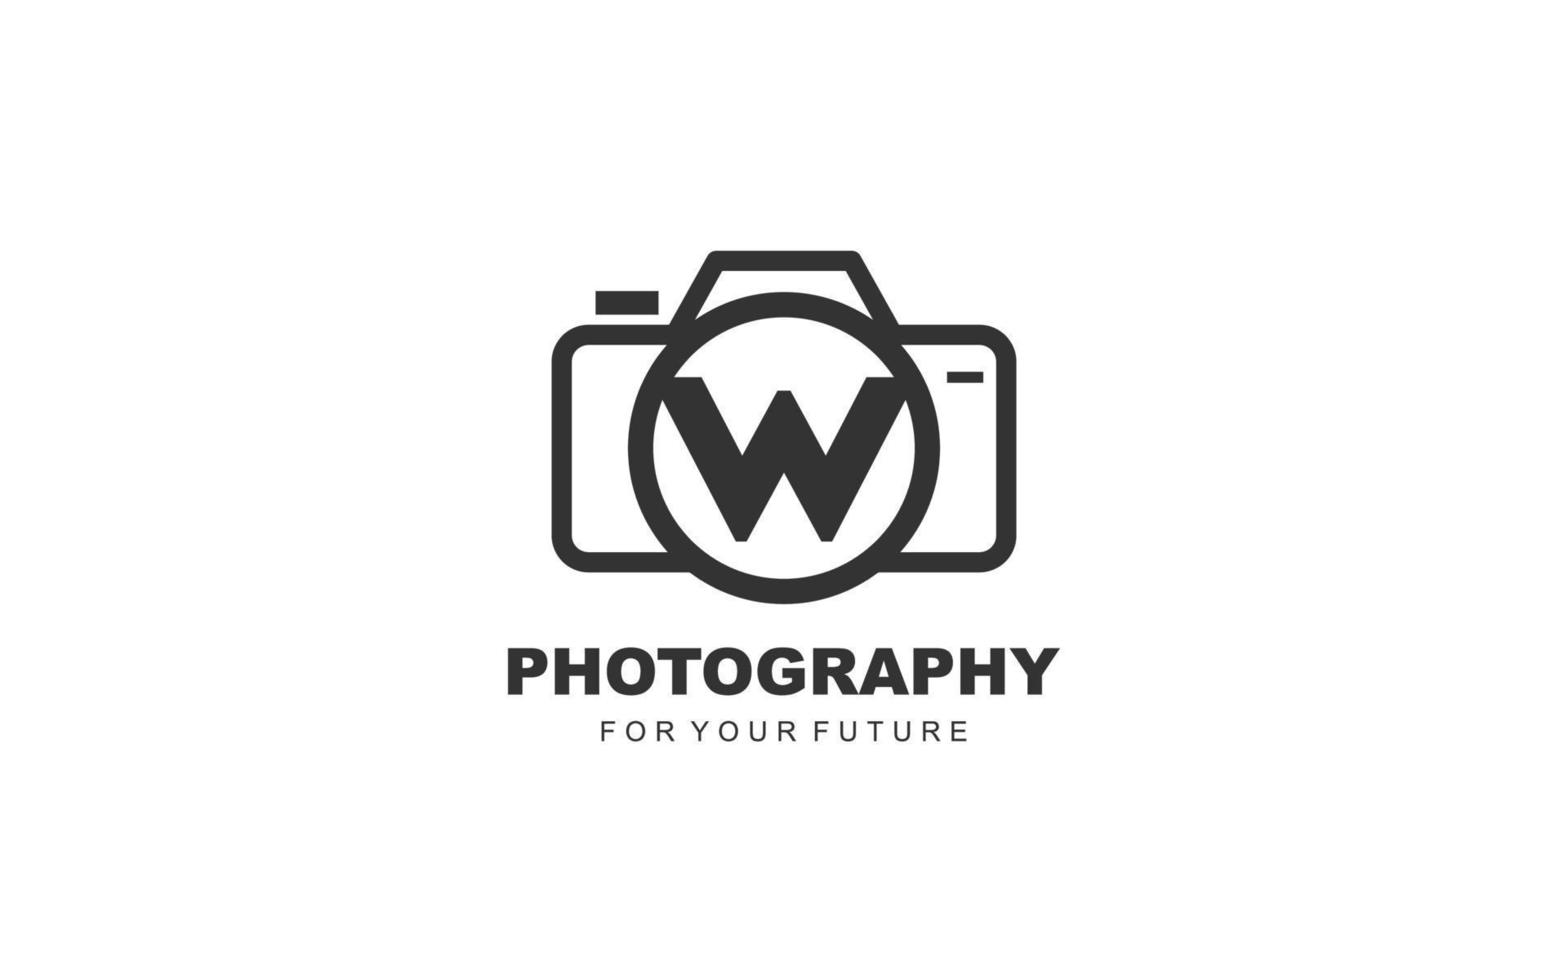 W logo photography for branding company. camera template vector illustration for your brand.